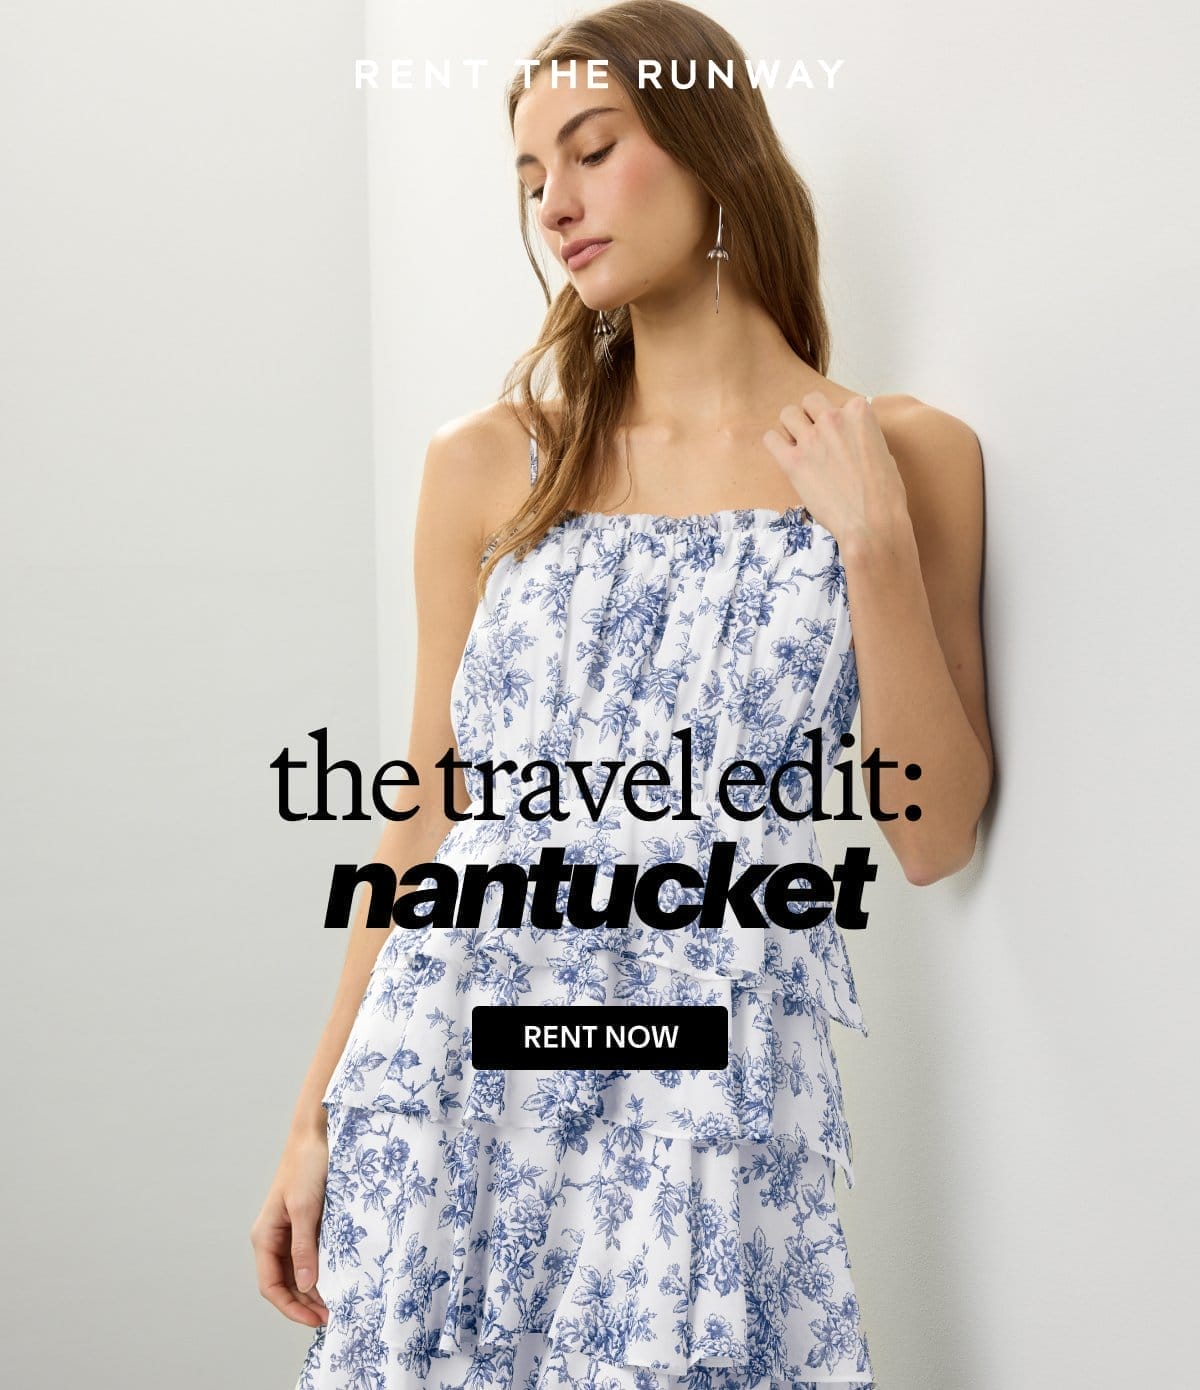 The Travel Edit: Nantucket | RESERVE NOW